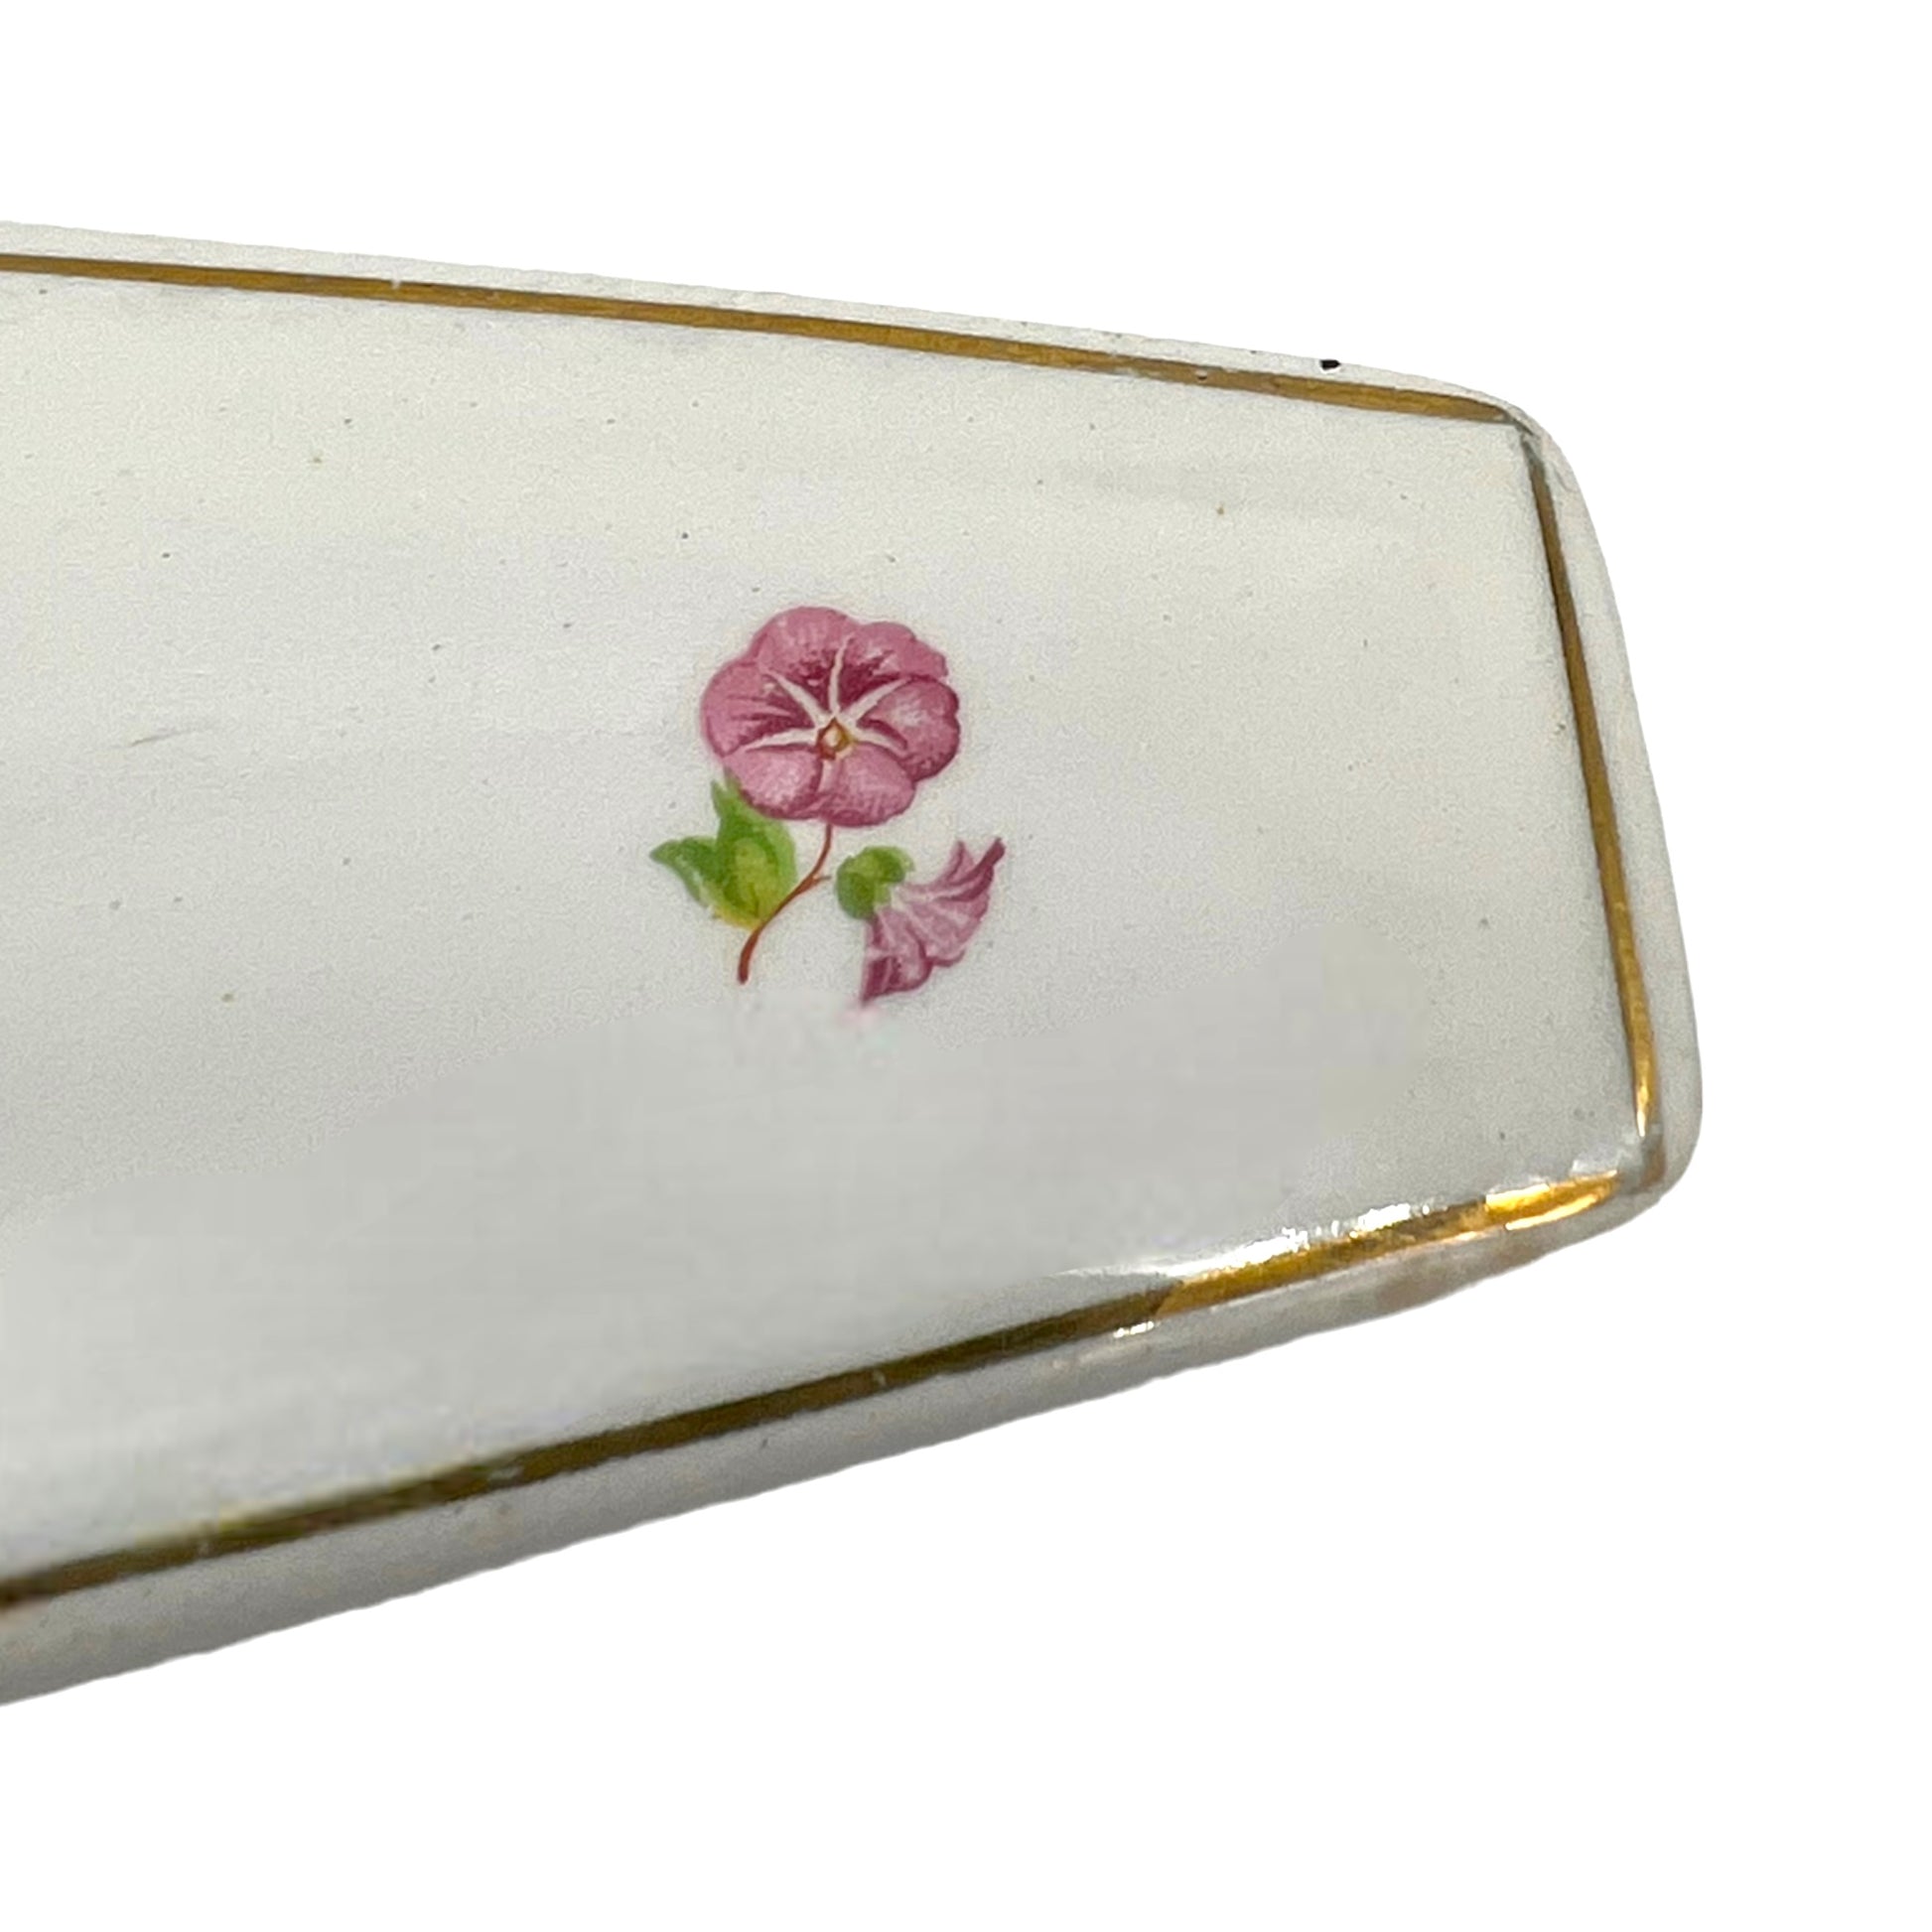 image 10 French porcelain cake server sold by All Things French Store